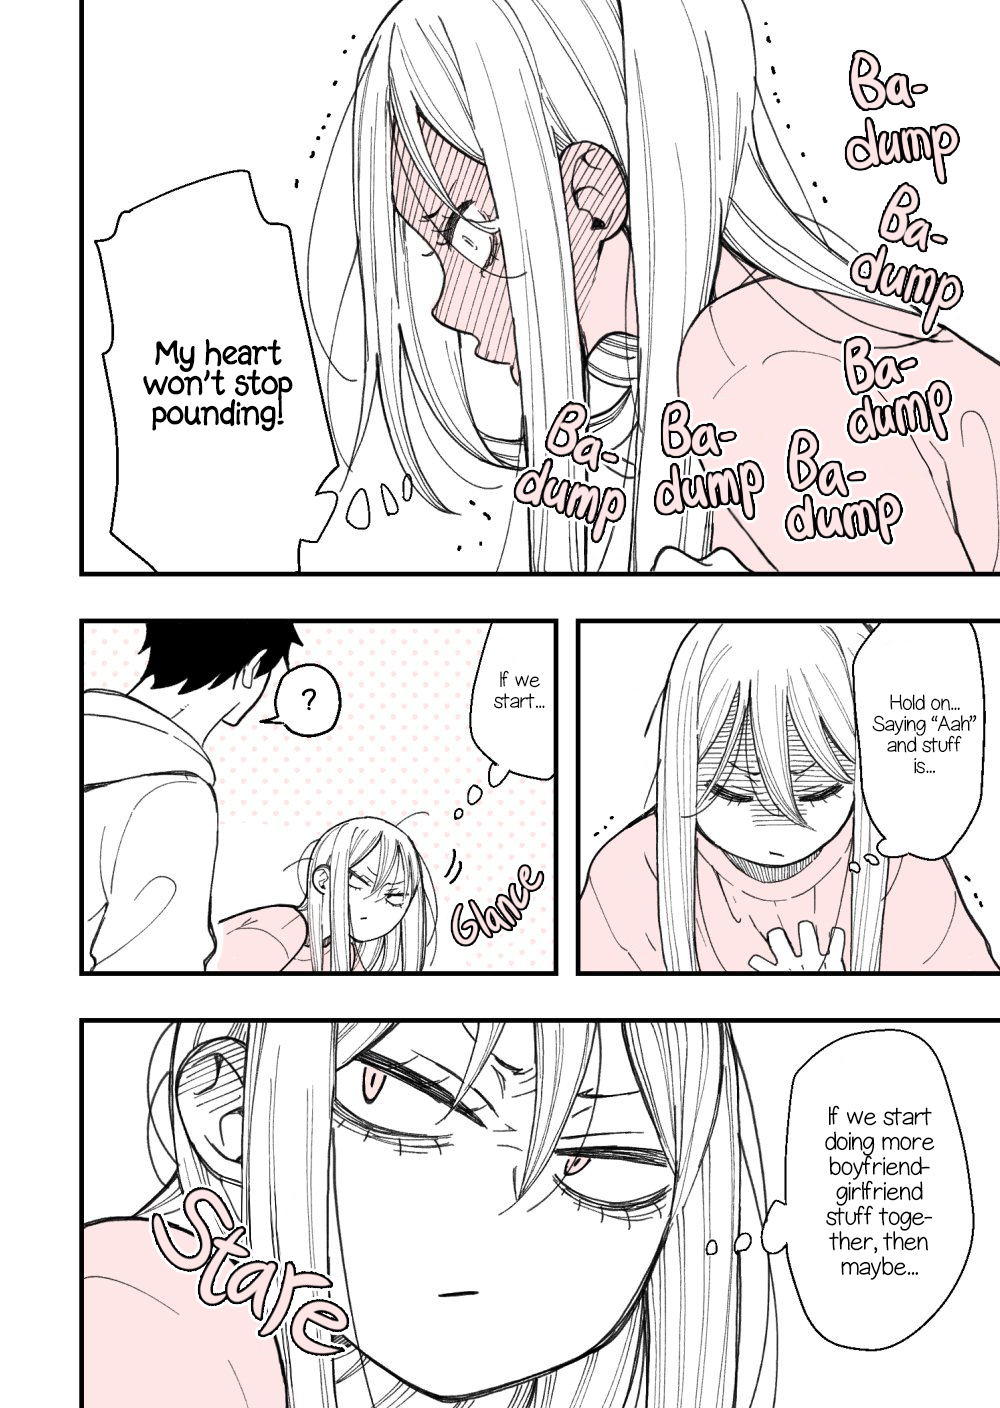 The Story of a Girl with Sanpaku Eyes Vol. 1 Ch. 19 Thinking about it